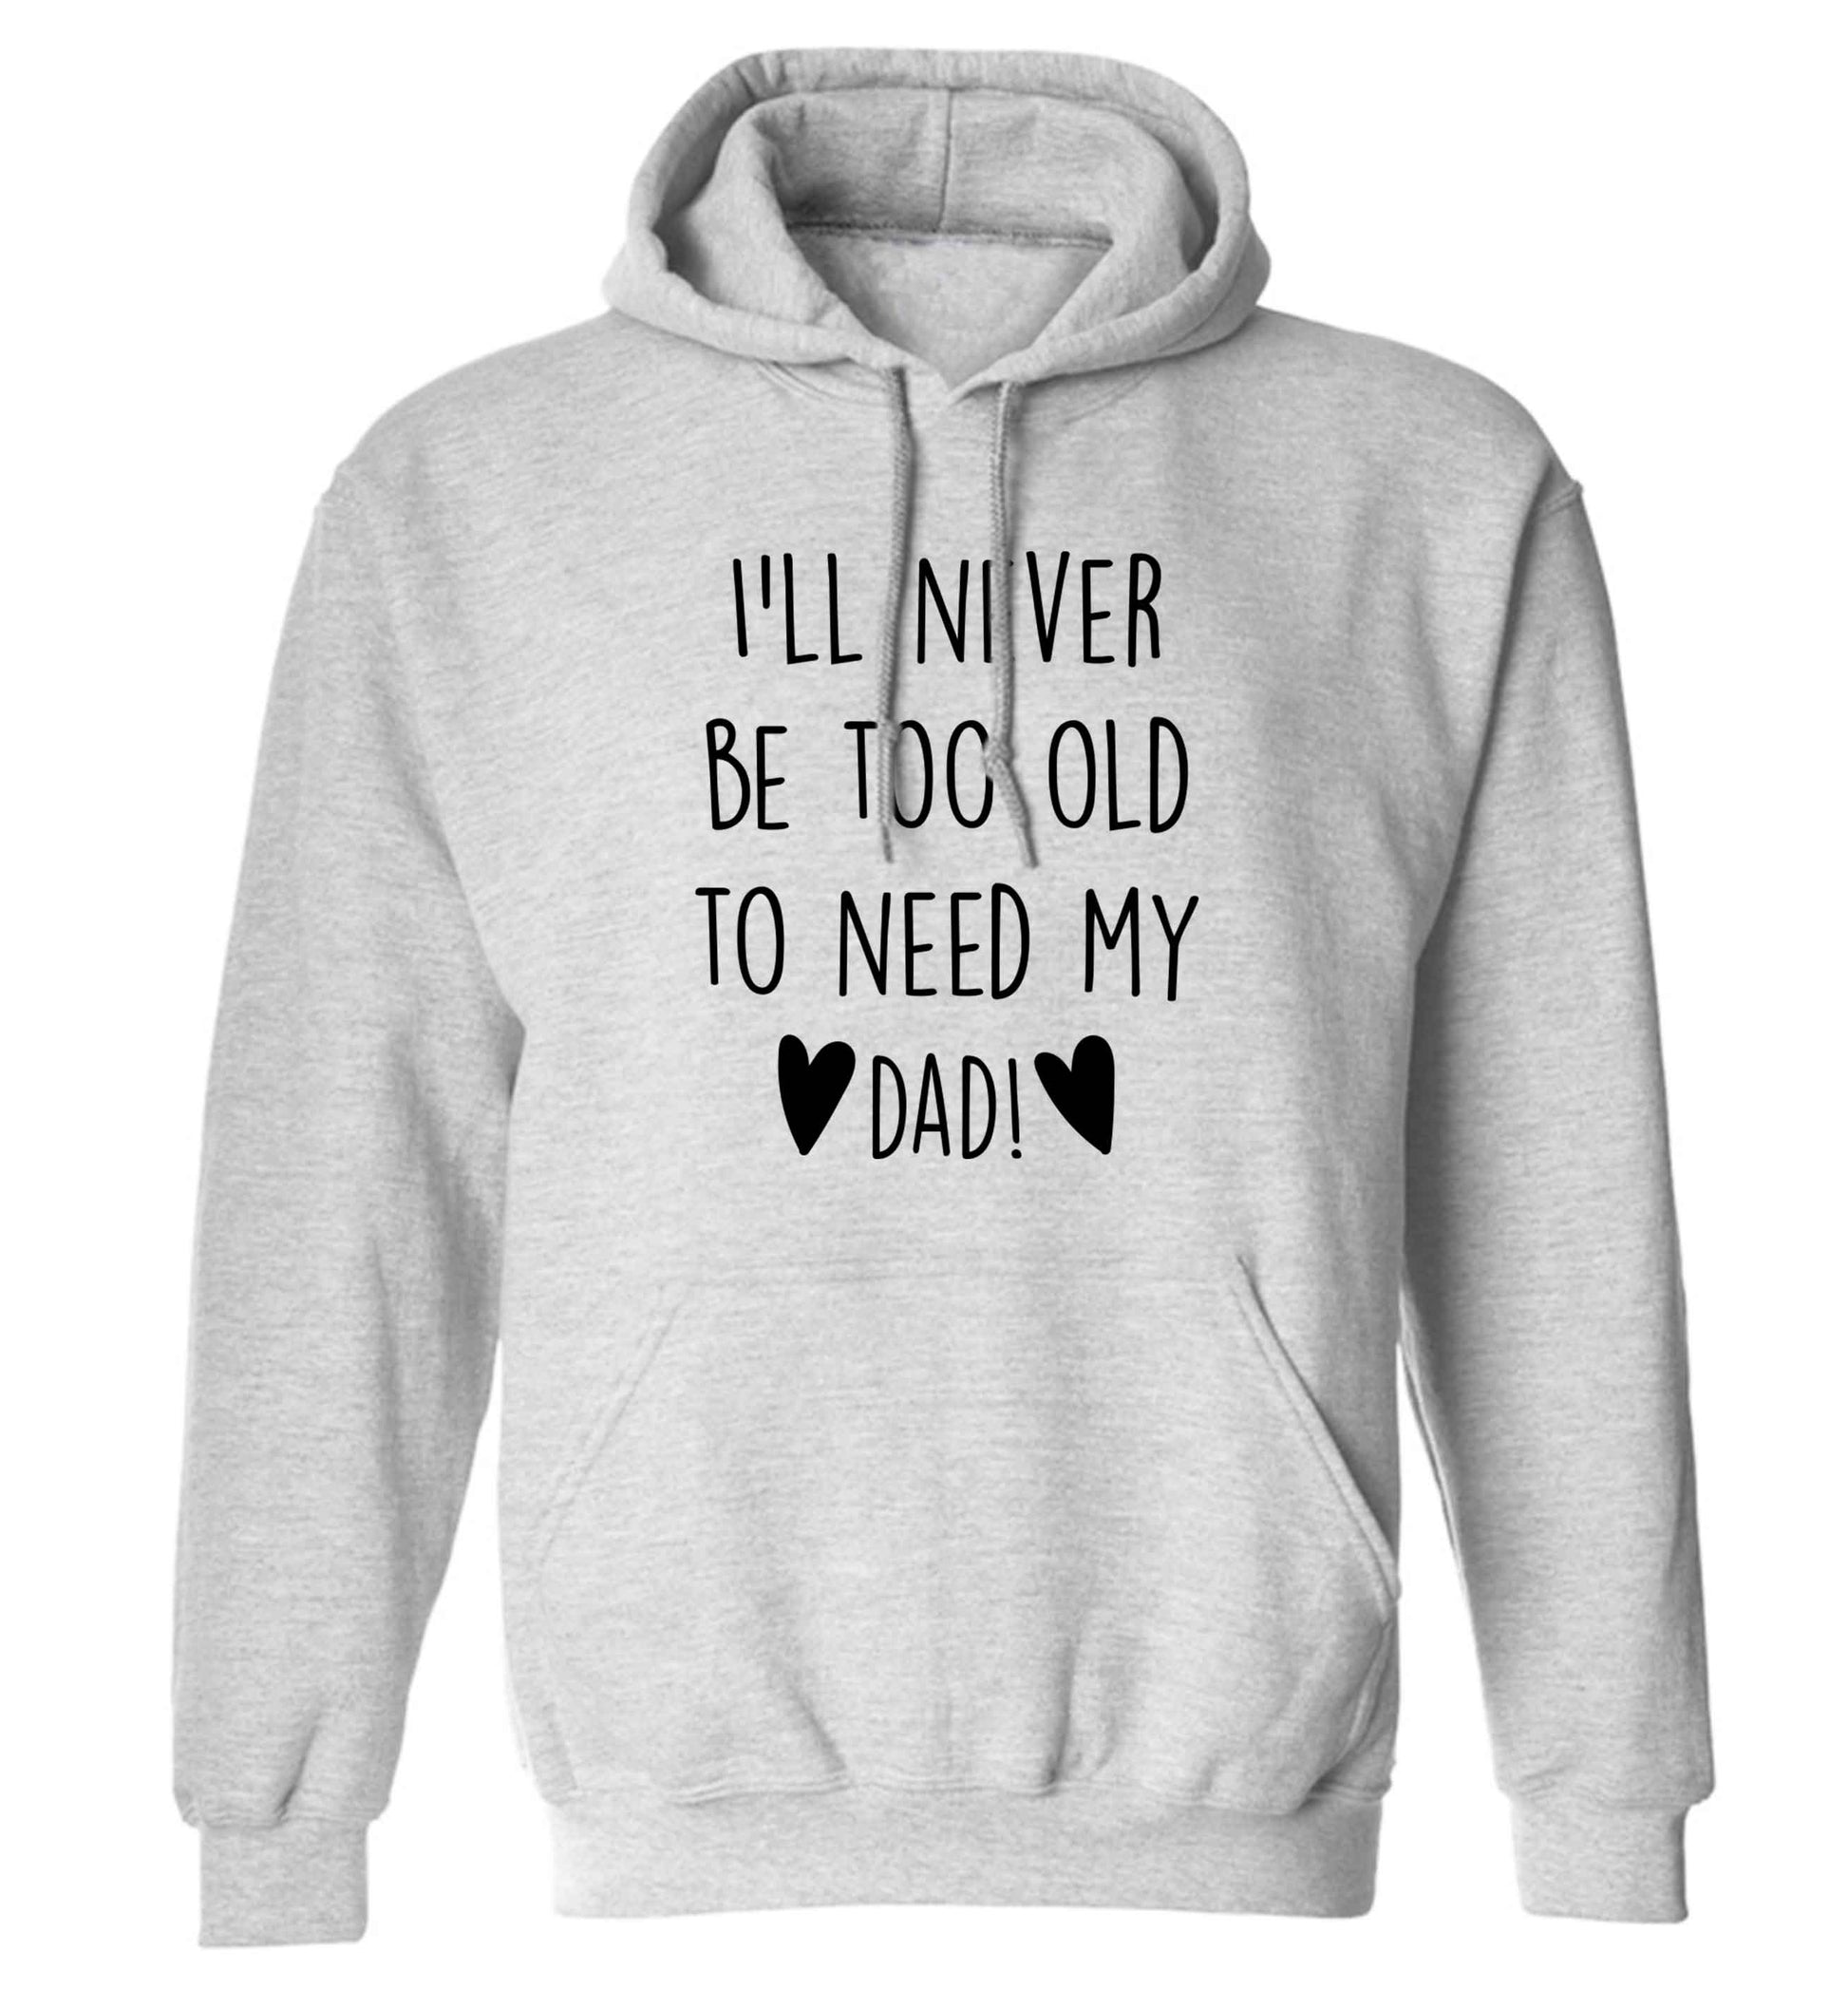 I'll never be too old to need my dad adults unisex grey hoodie 2XL